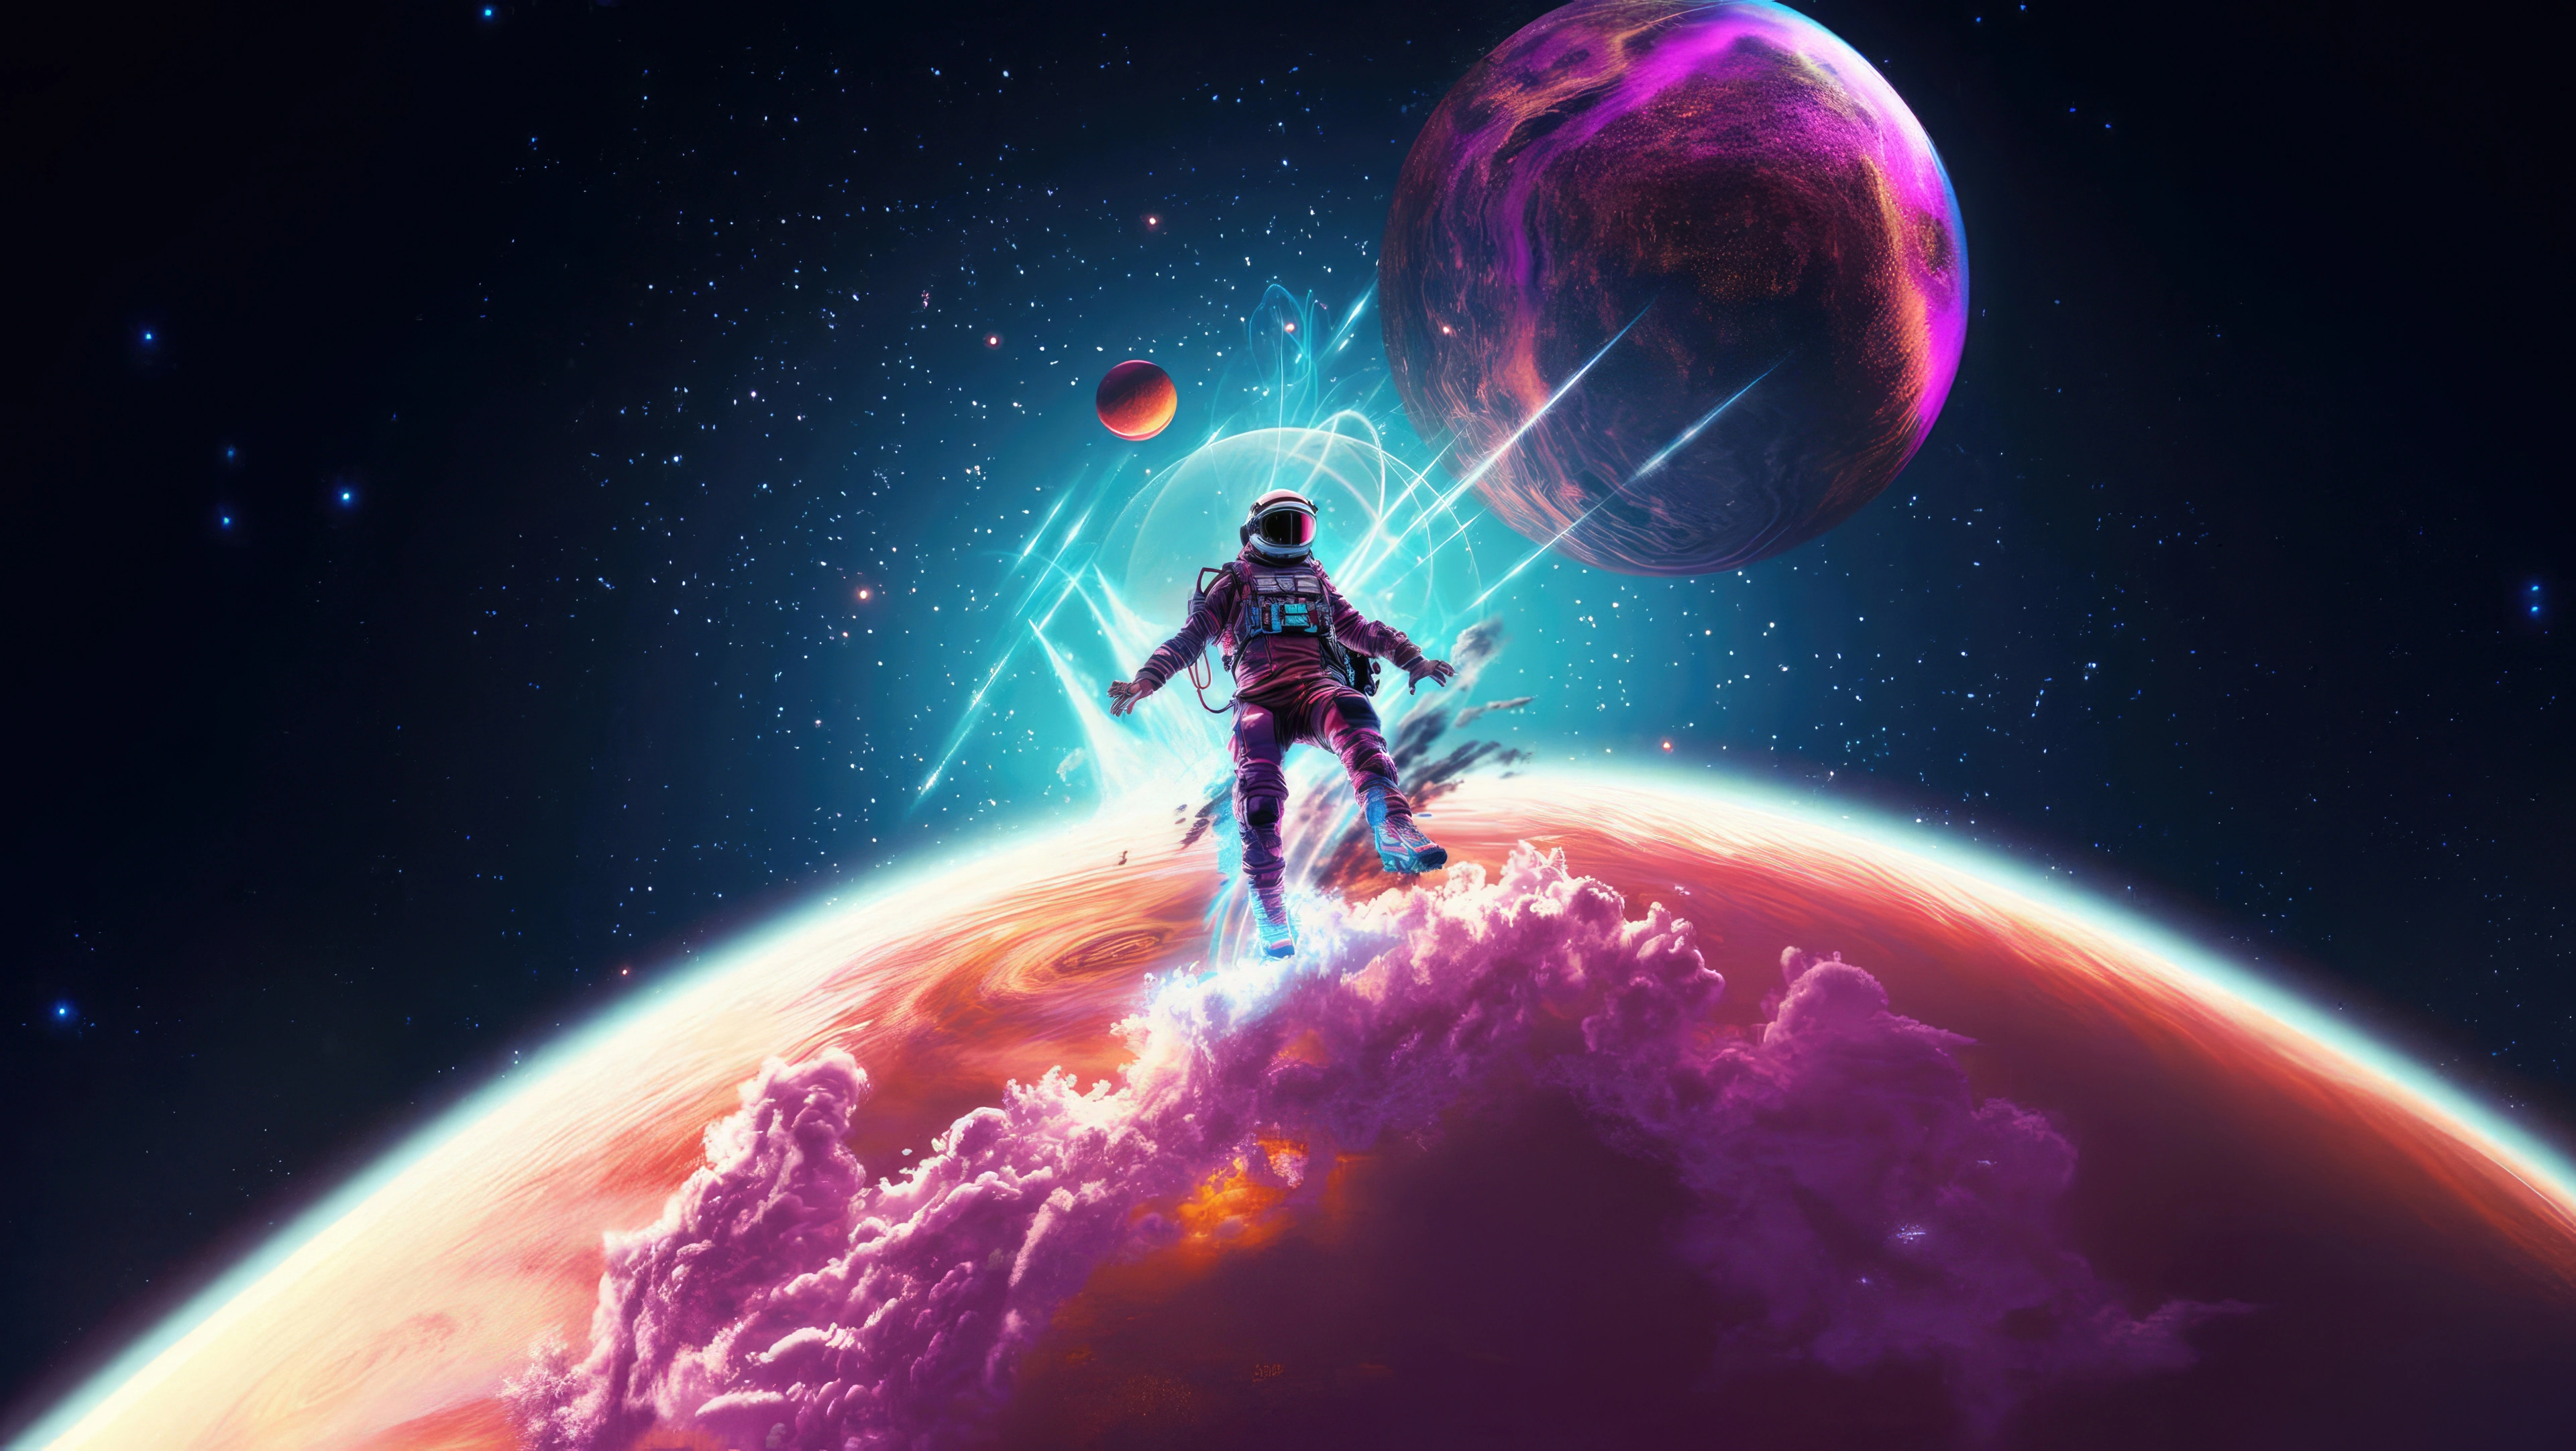 astronaut leaping amid a colorful galaxy 7c.jpg